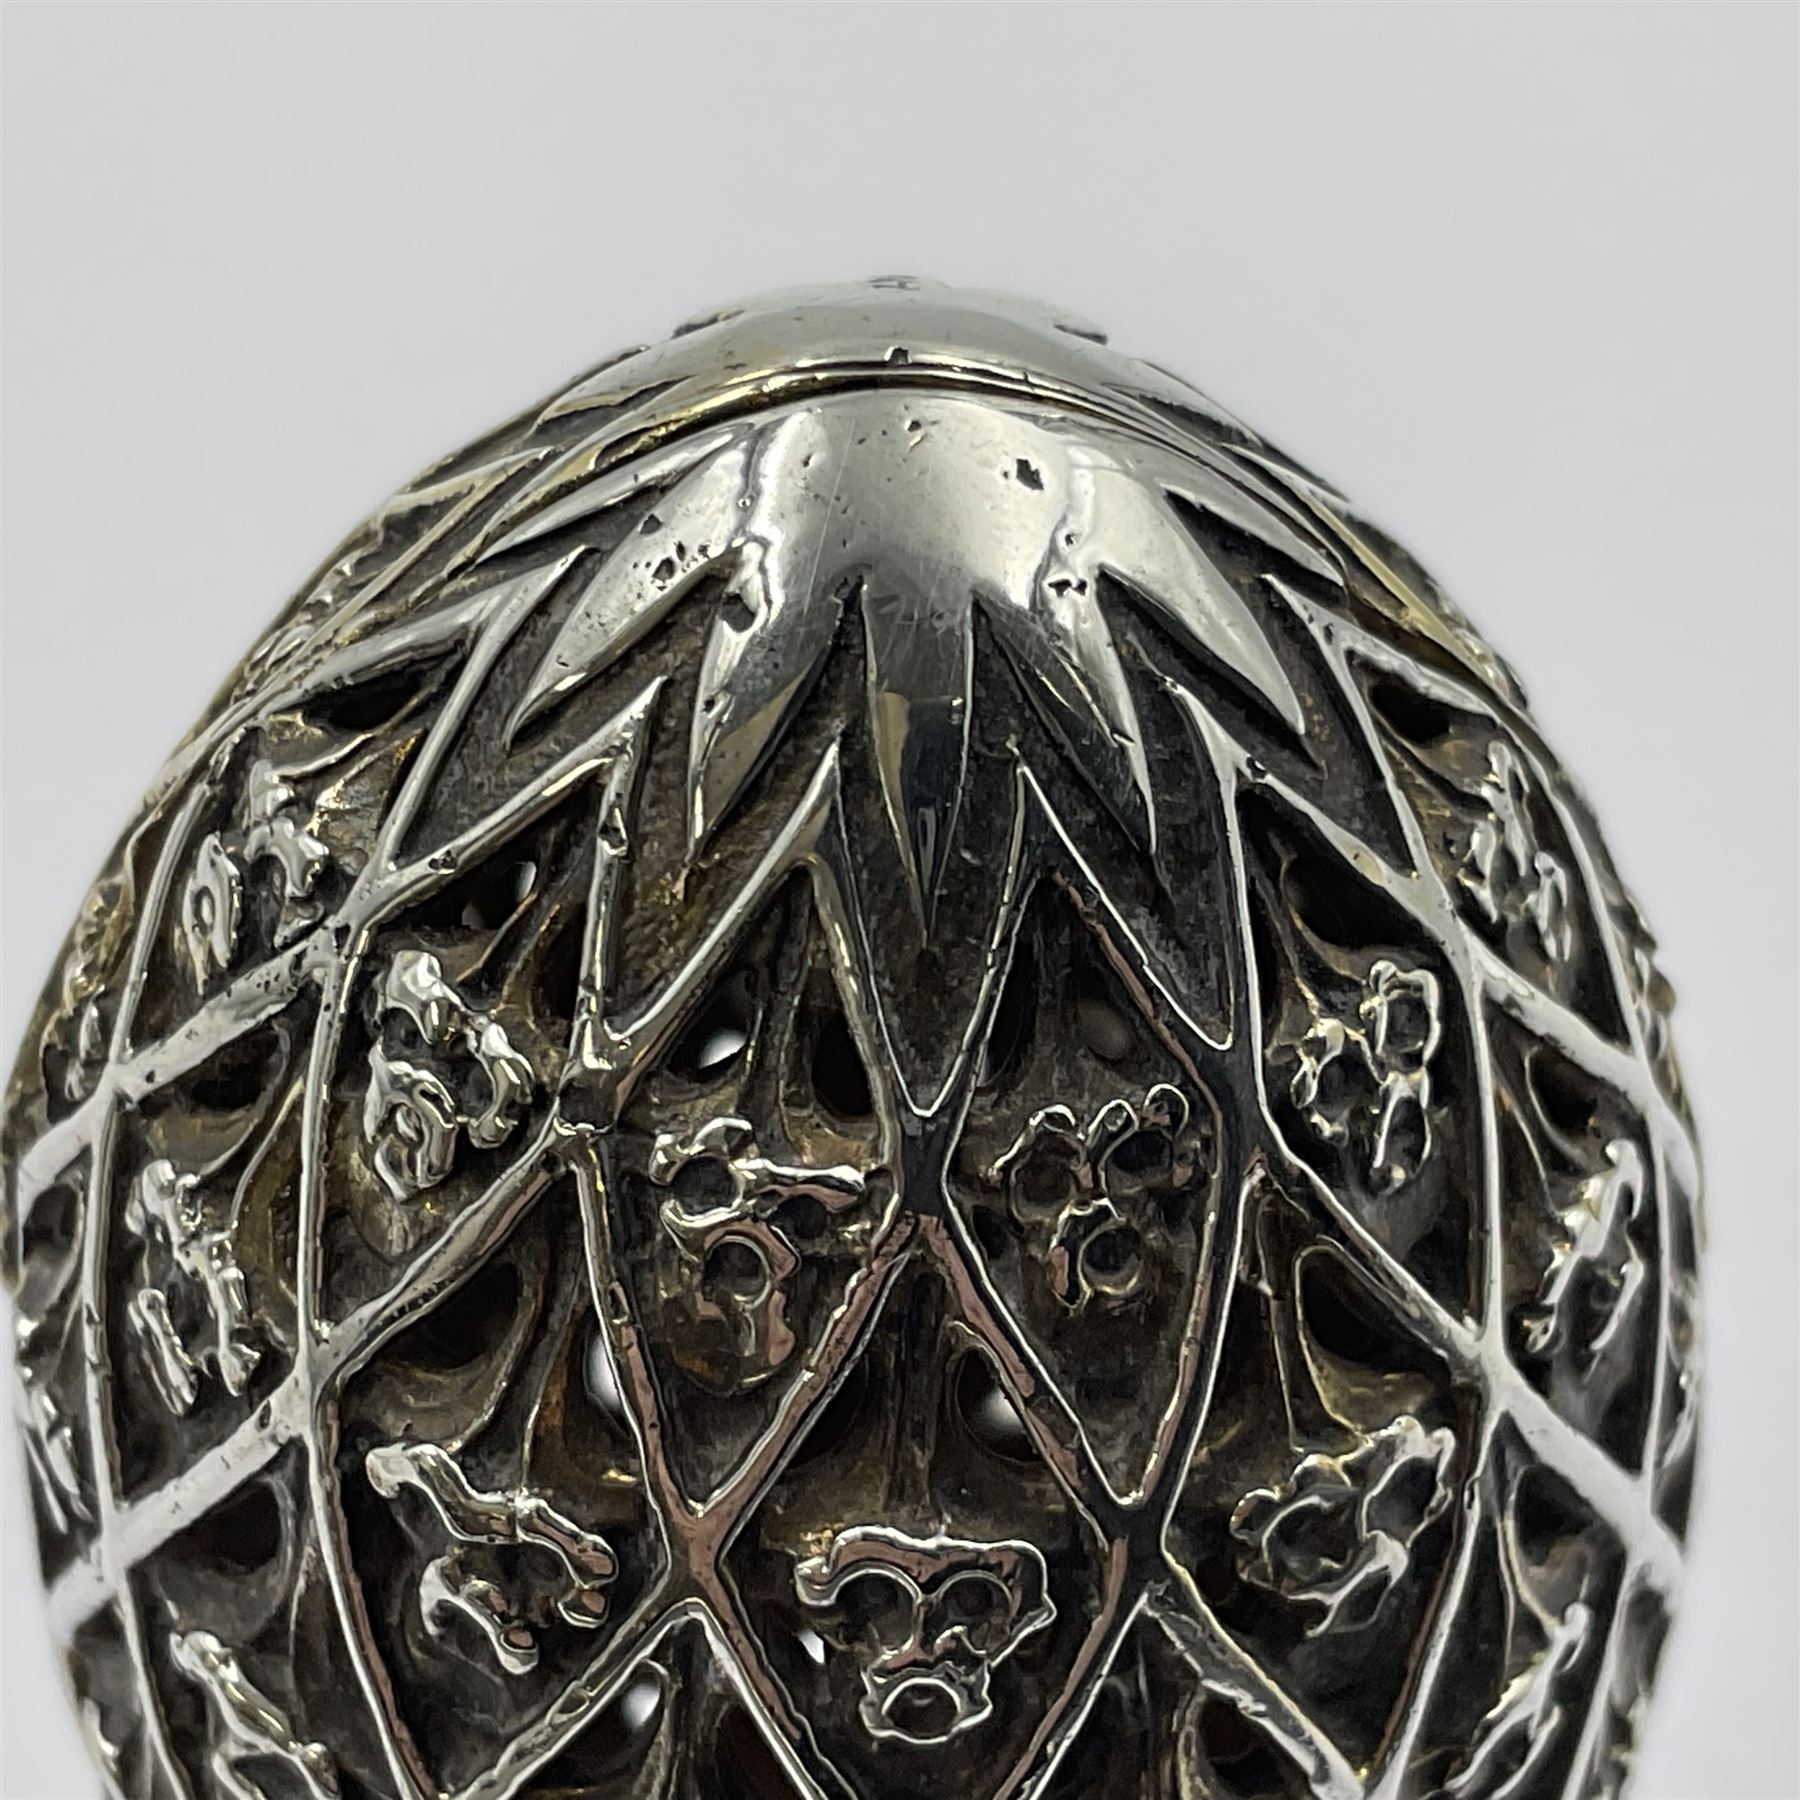 Modern silver limited edition Easter egg - Image 6 of 19